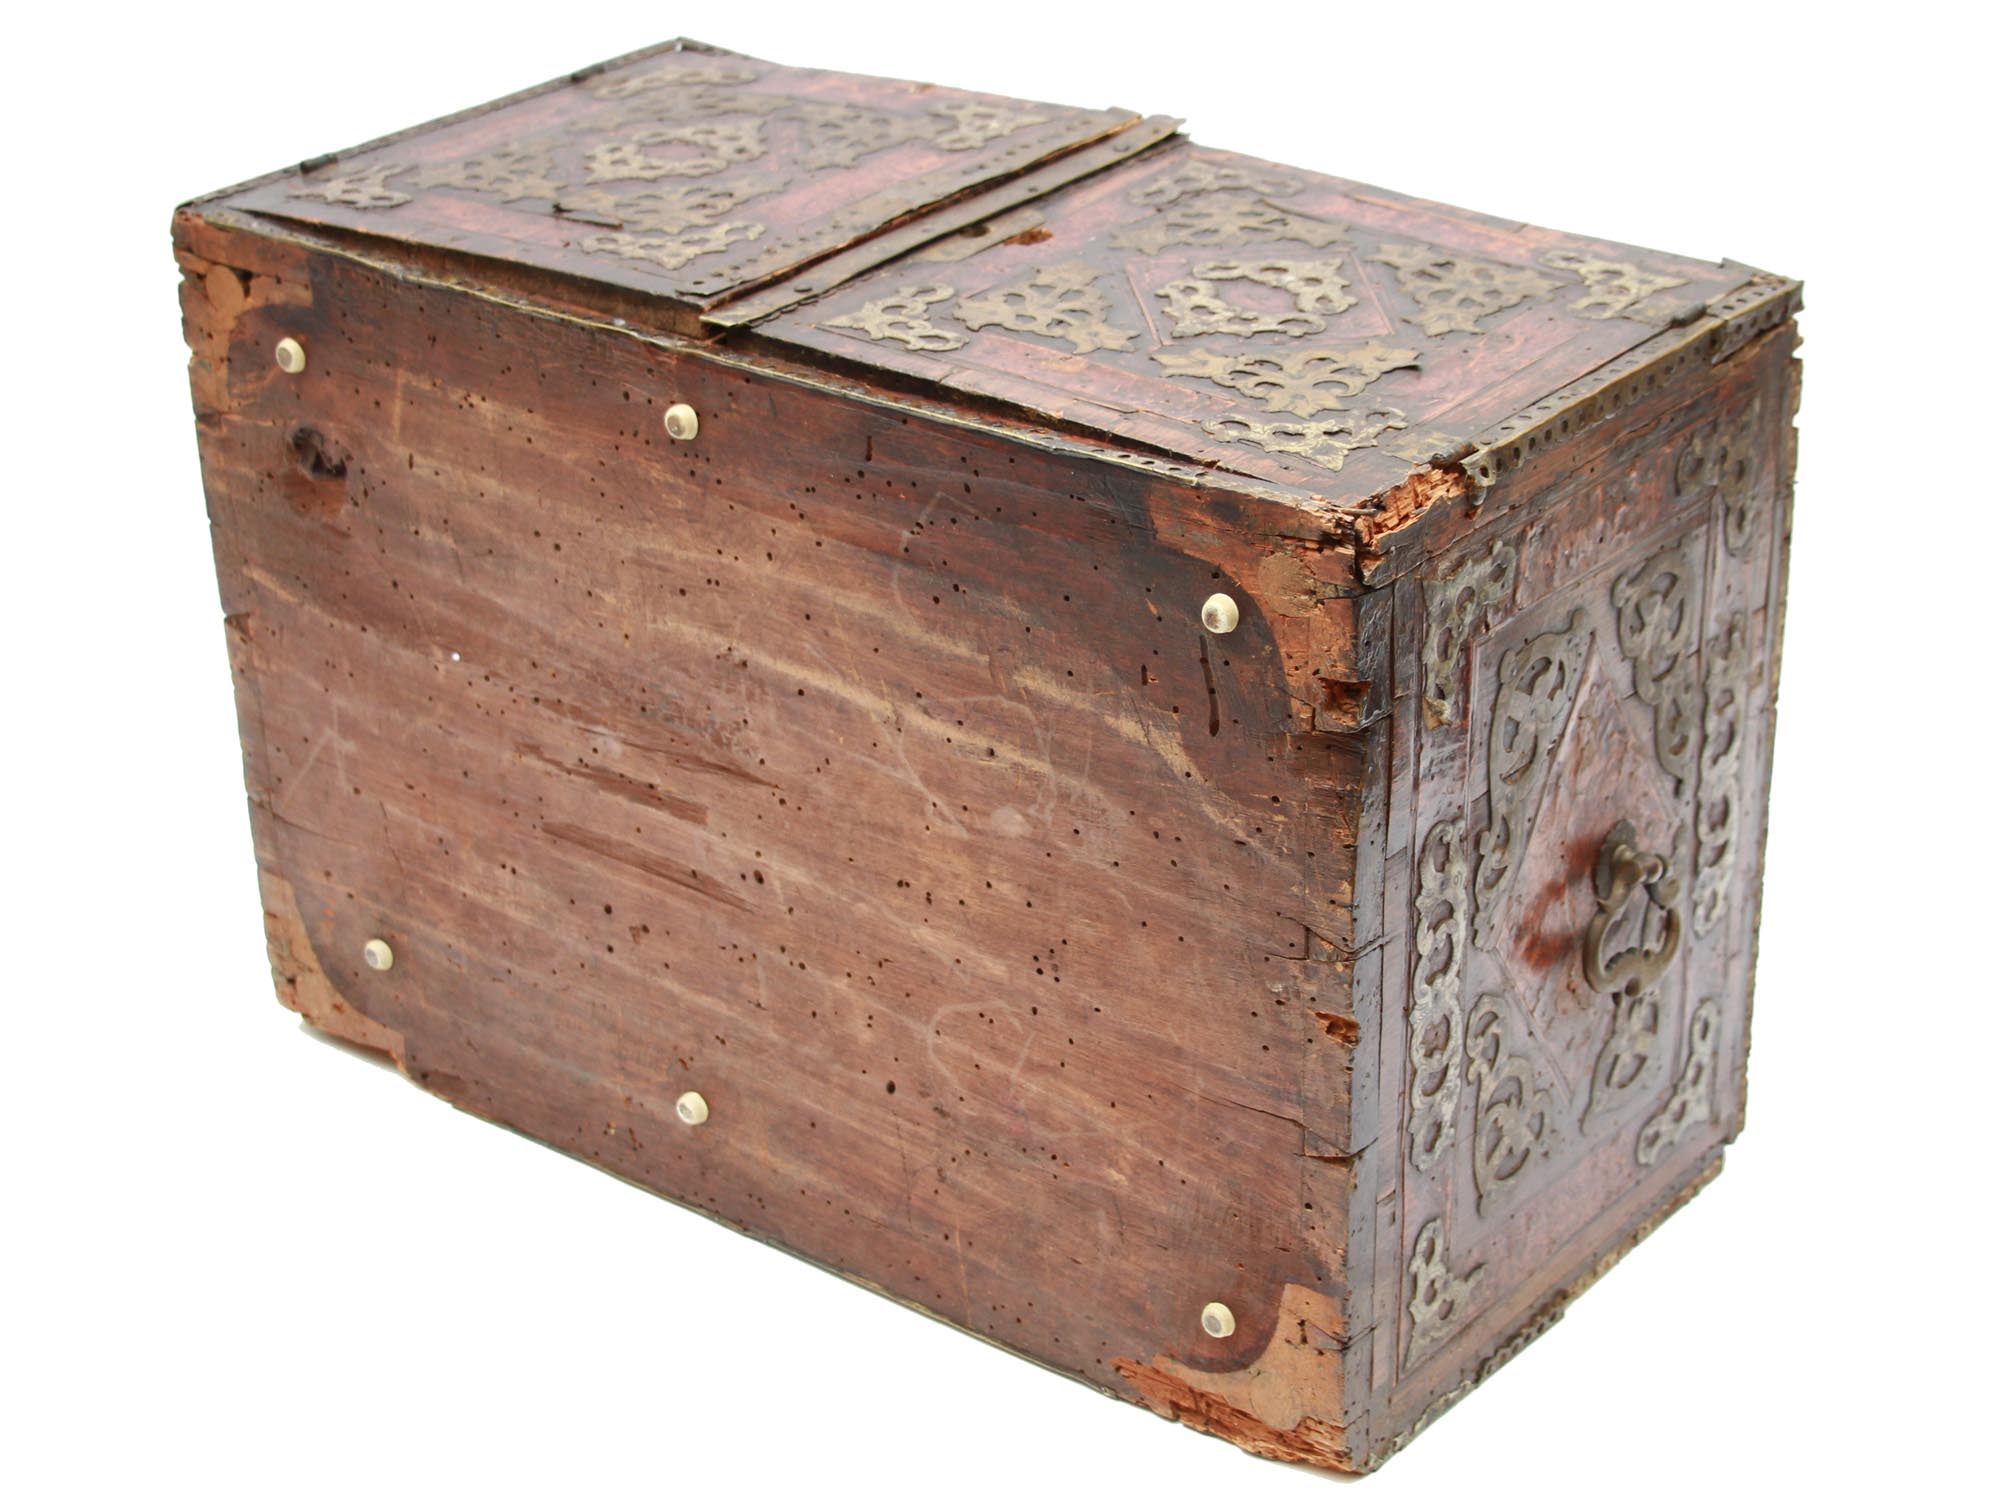 AN ANTIQUE COLONIAL SPANISH JEWELRY BOX 18TH C. PIC-4